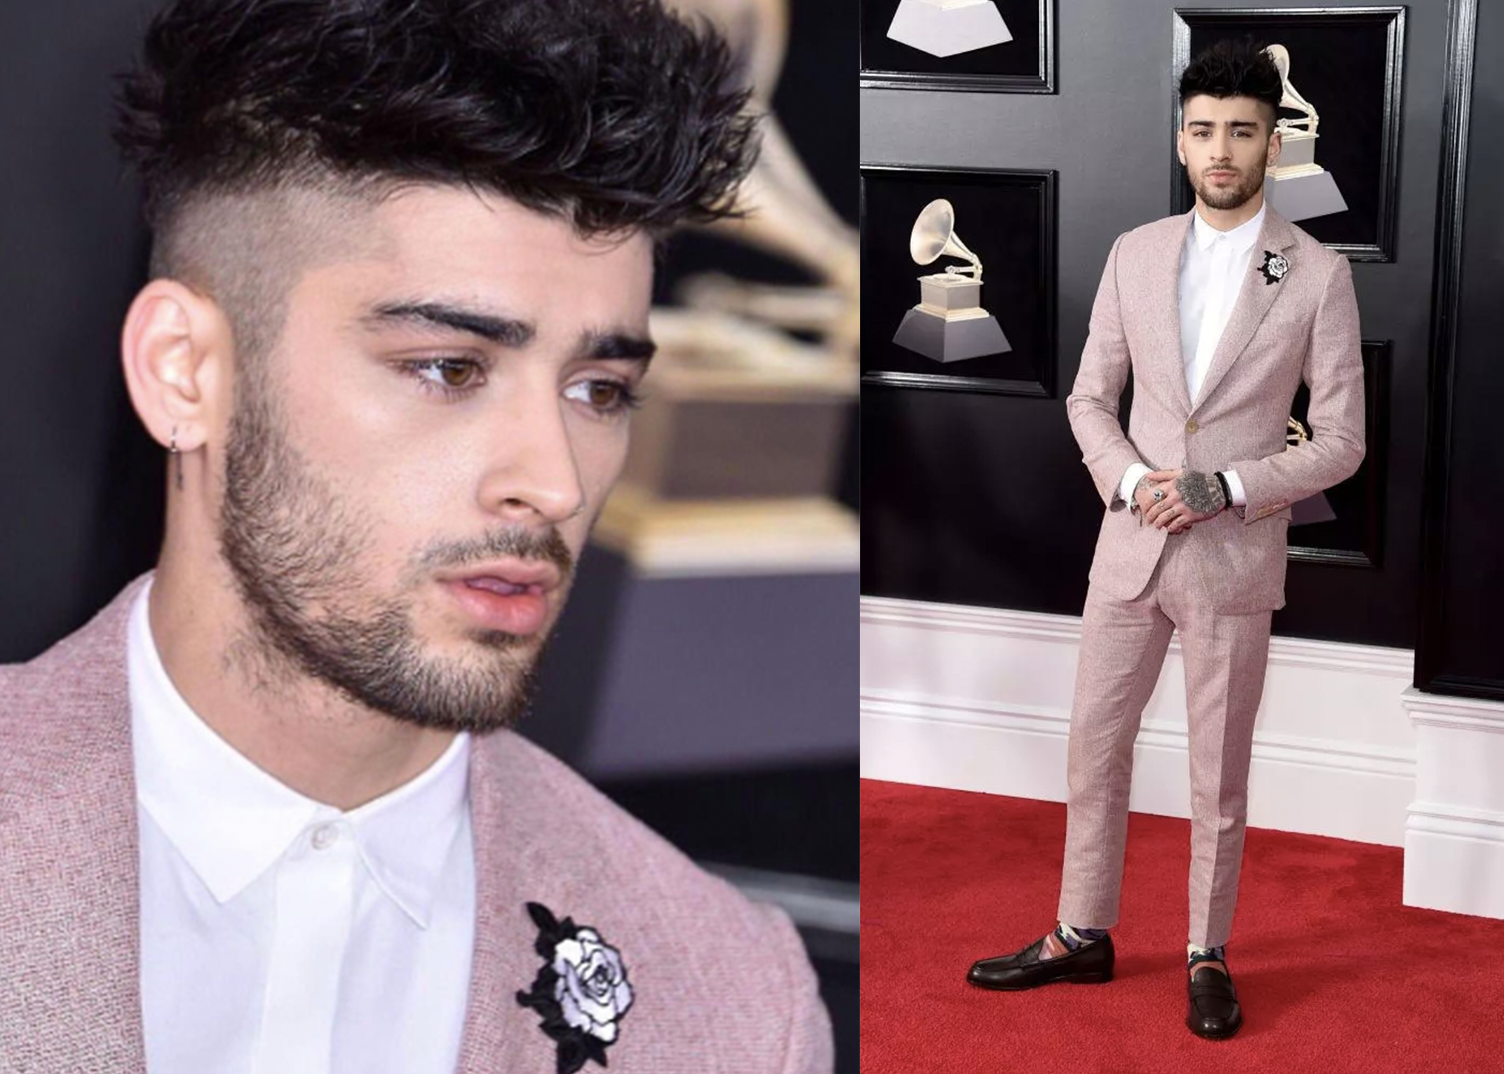 Take Grooming Cues For Your Daily Hairstyle From Ed Sheeran And Zayn Malik